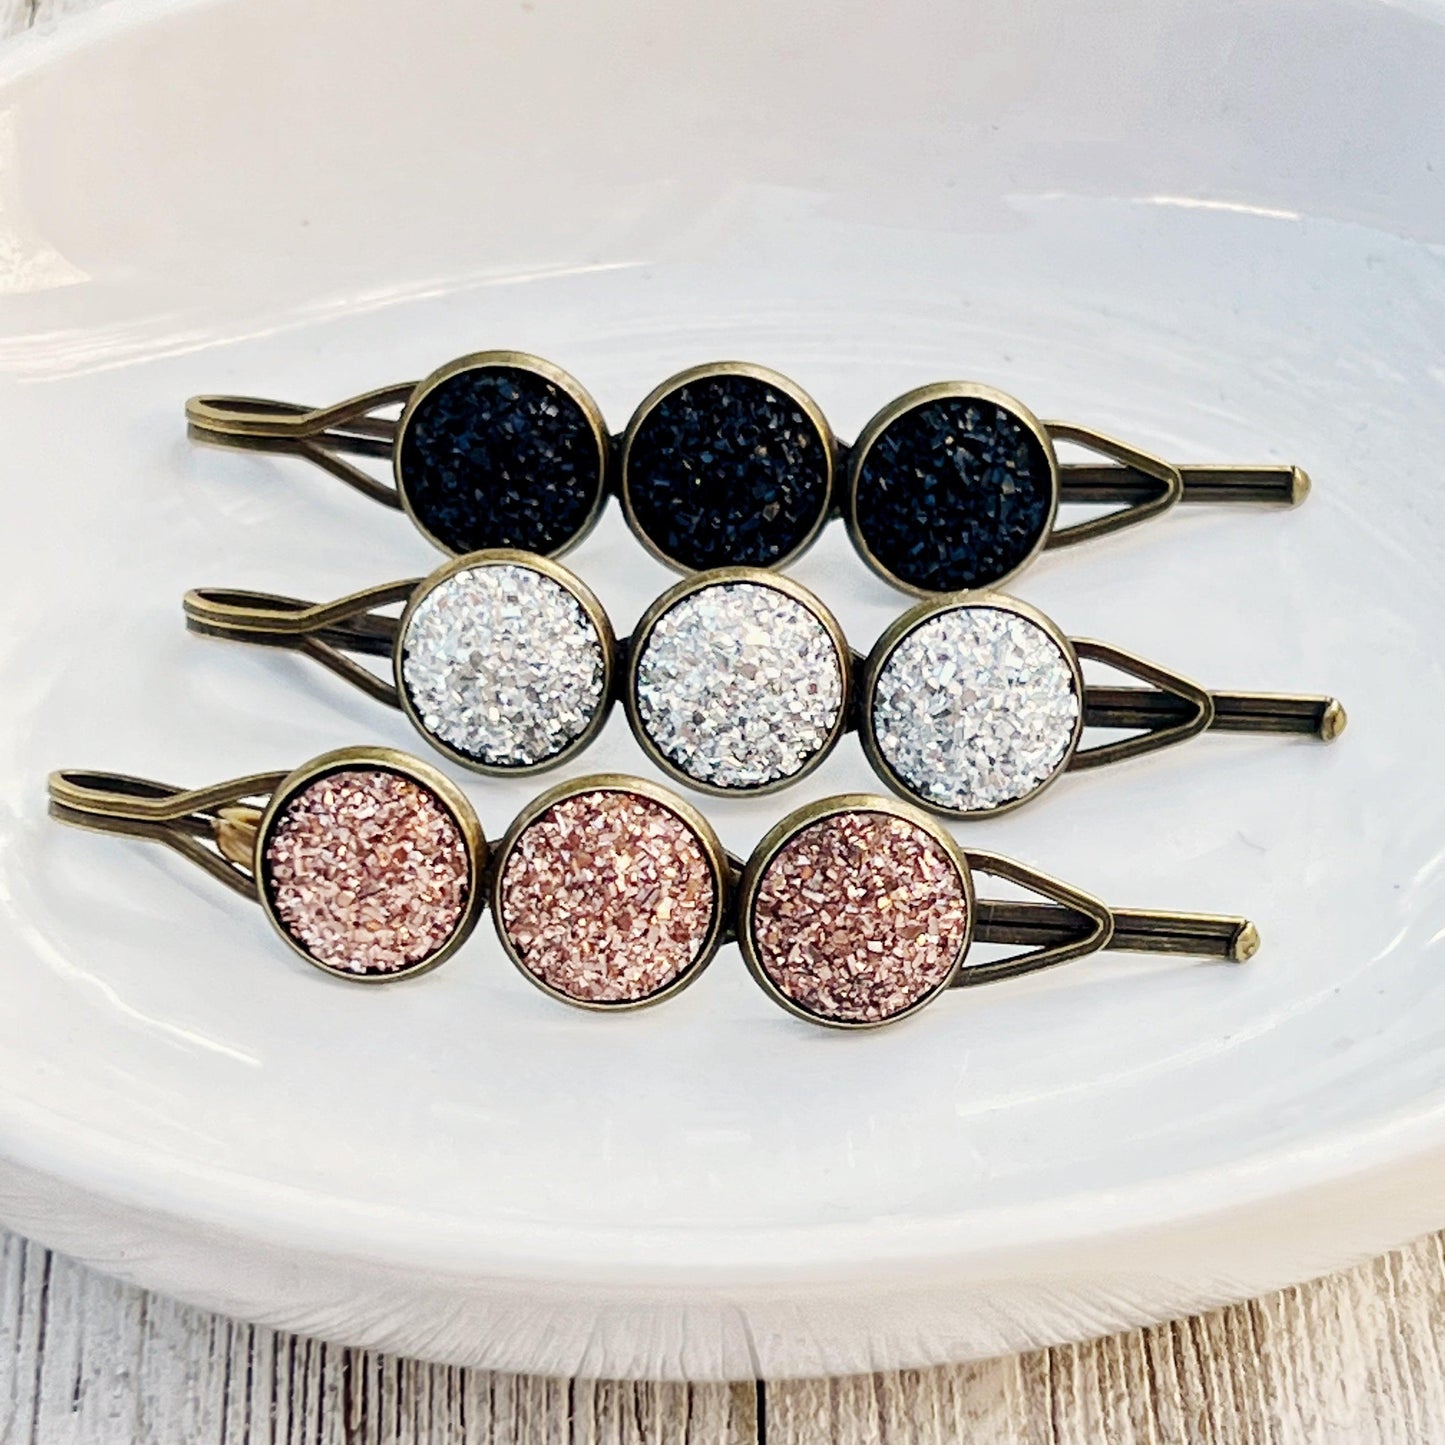 Set of 3 Druzy Hair Pins: Silver, Copper, and Black for Versatile Styling